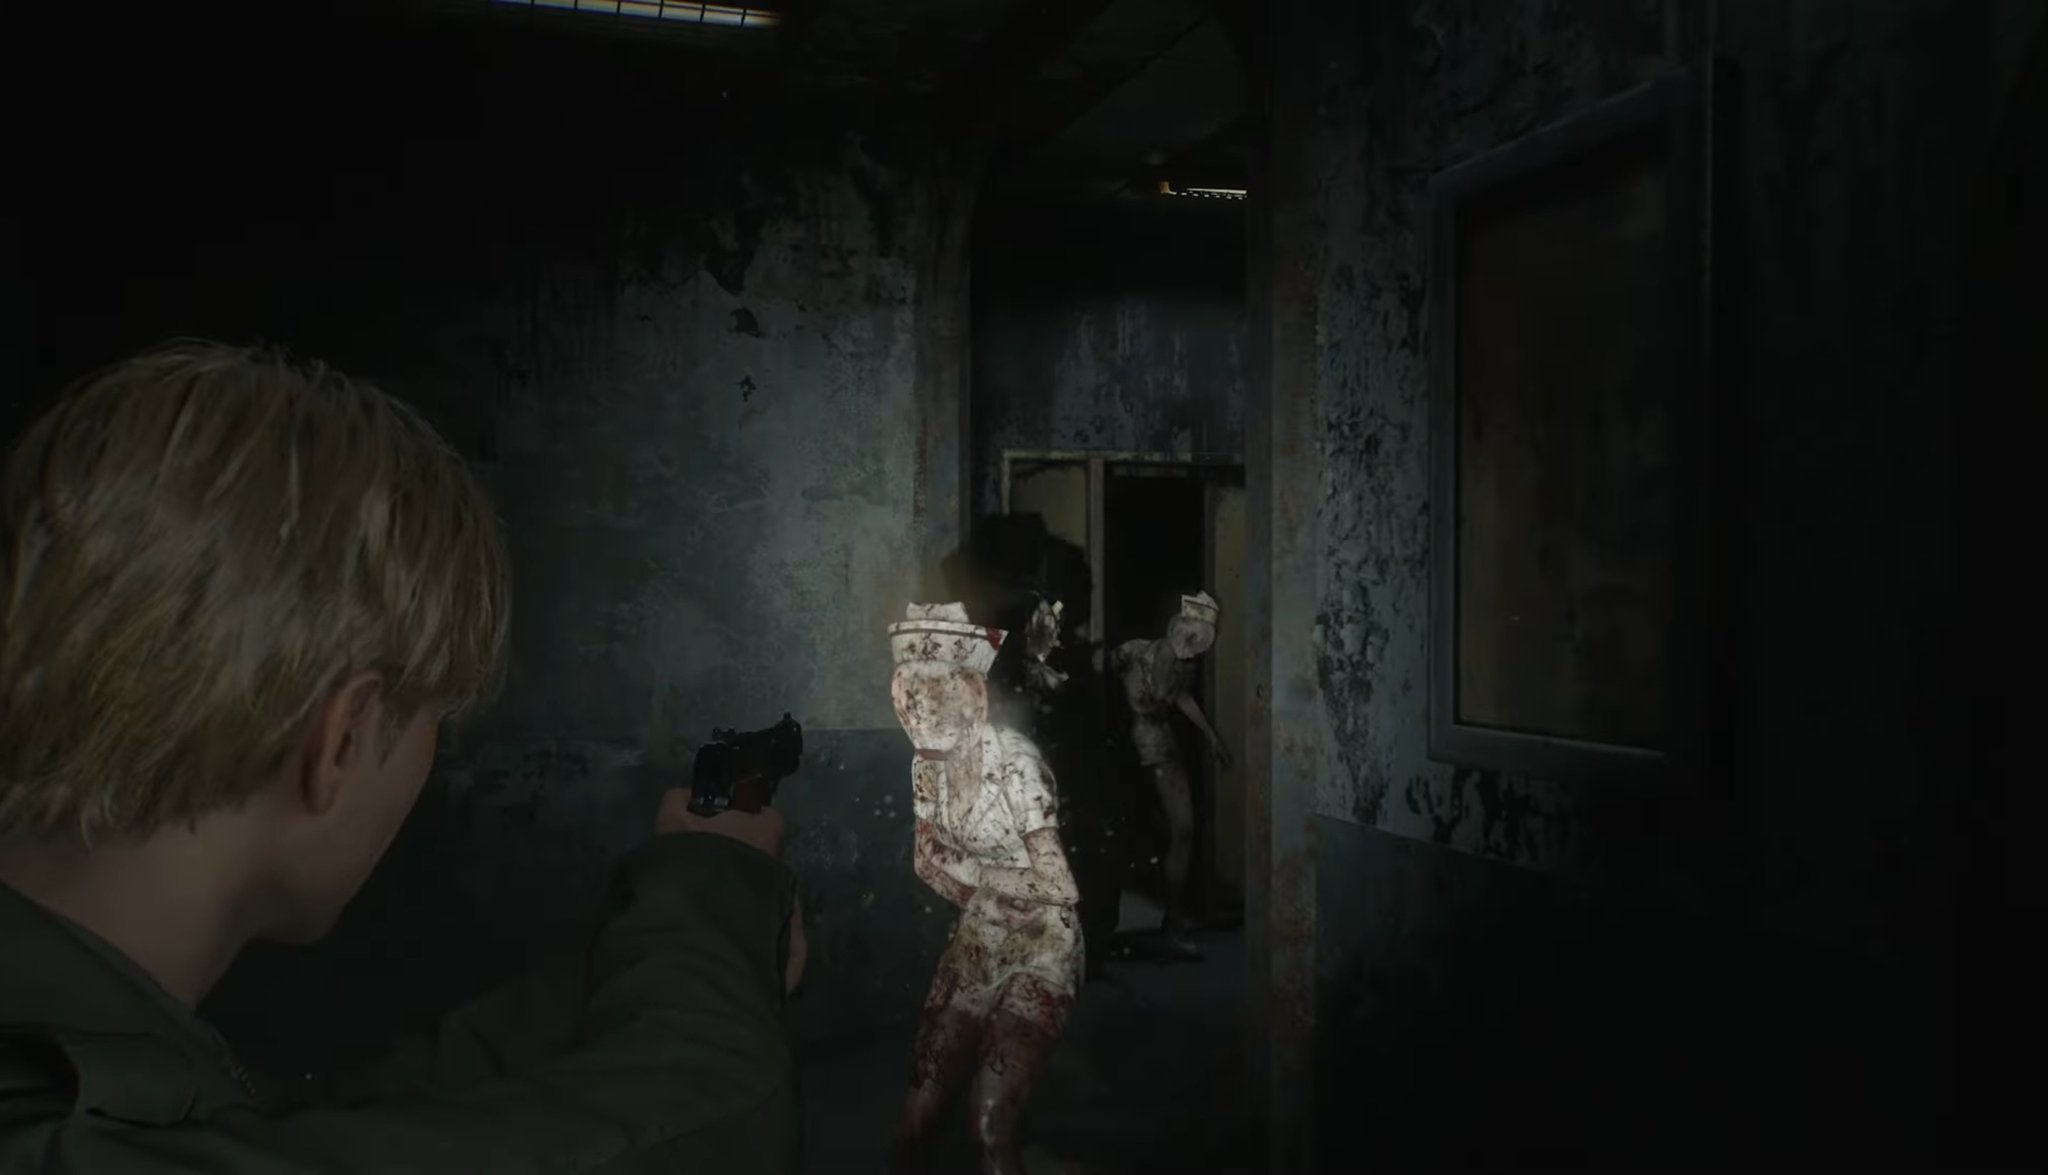 Silent Hill 2 remake's combat trailer had me genuinely worried